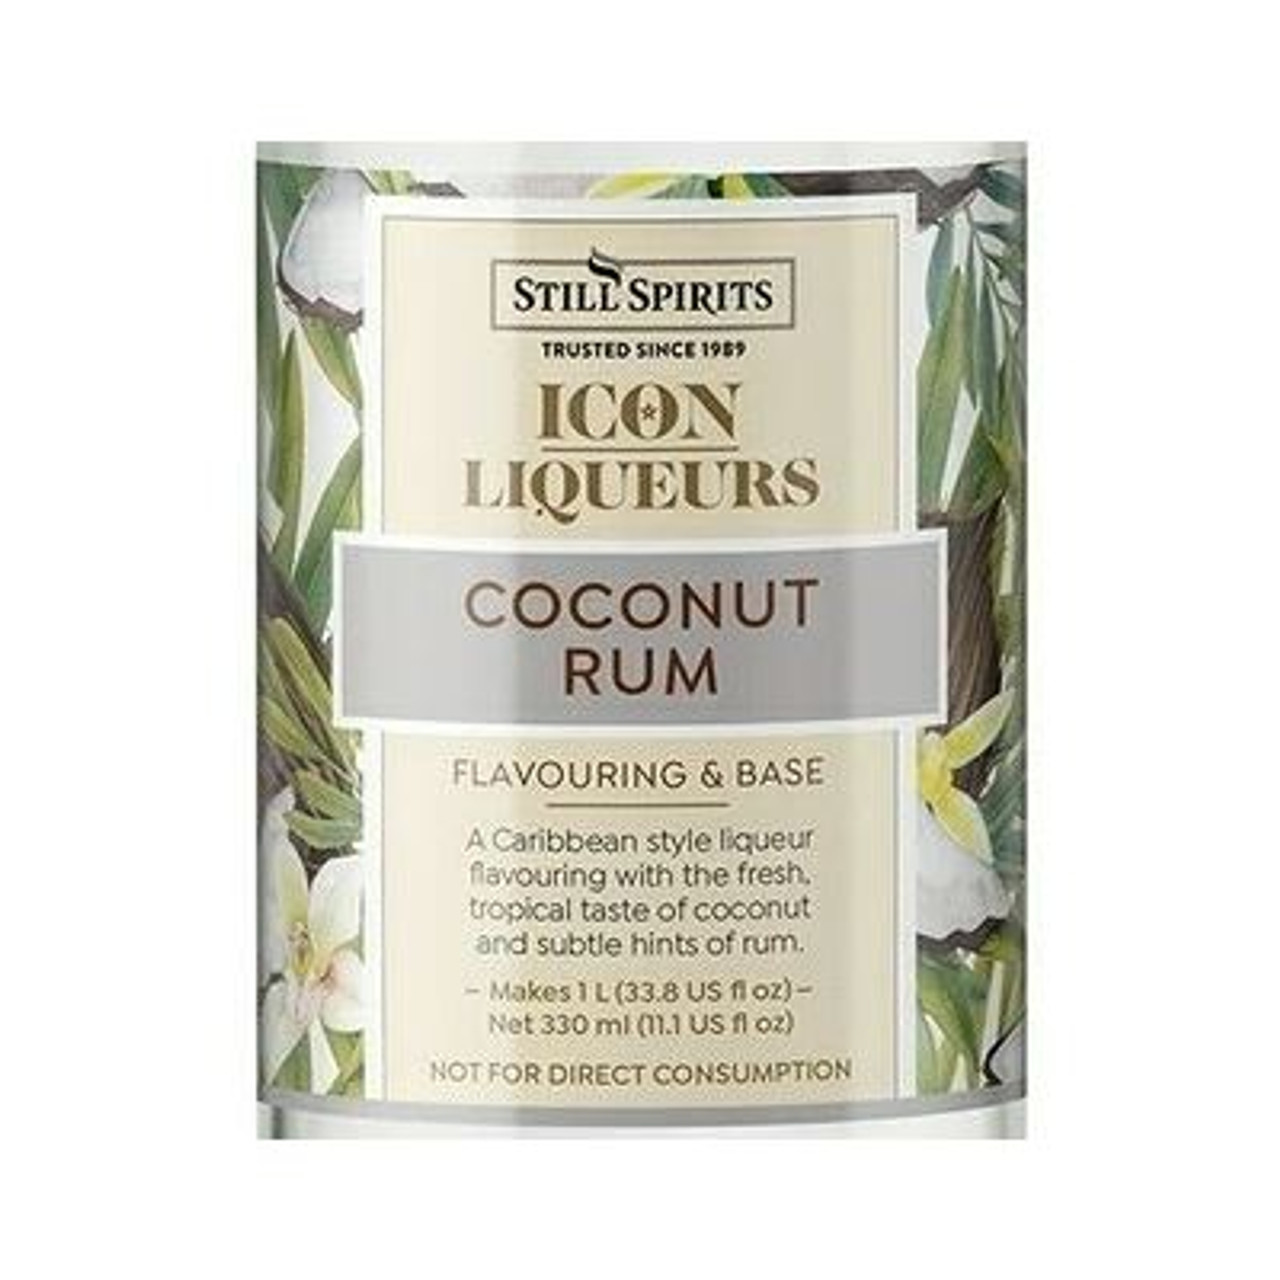 Still Spirits Coconut Rum Icon Top Up Liqueur Kit Essence Flavouring